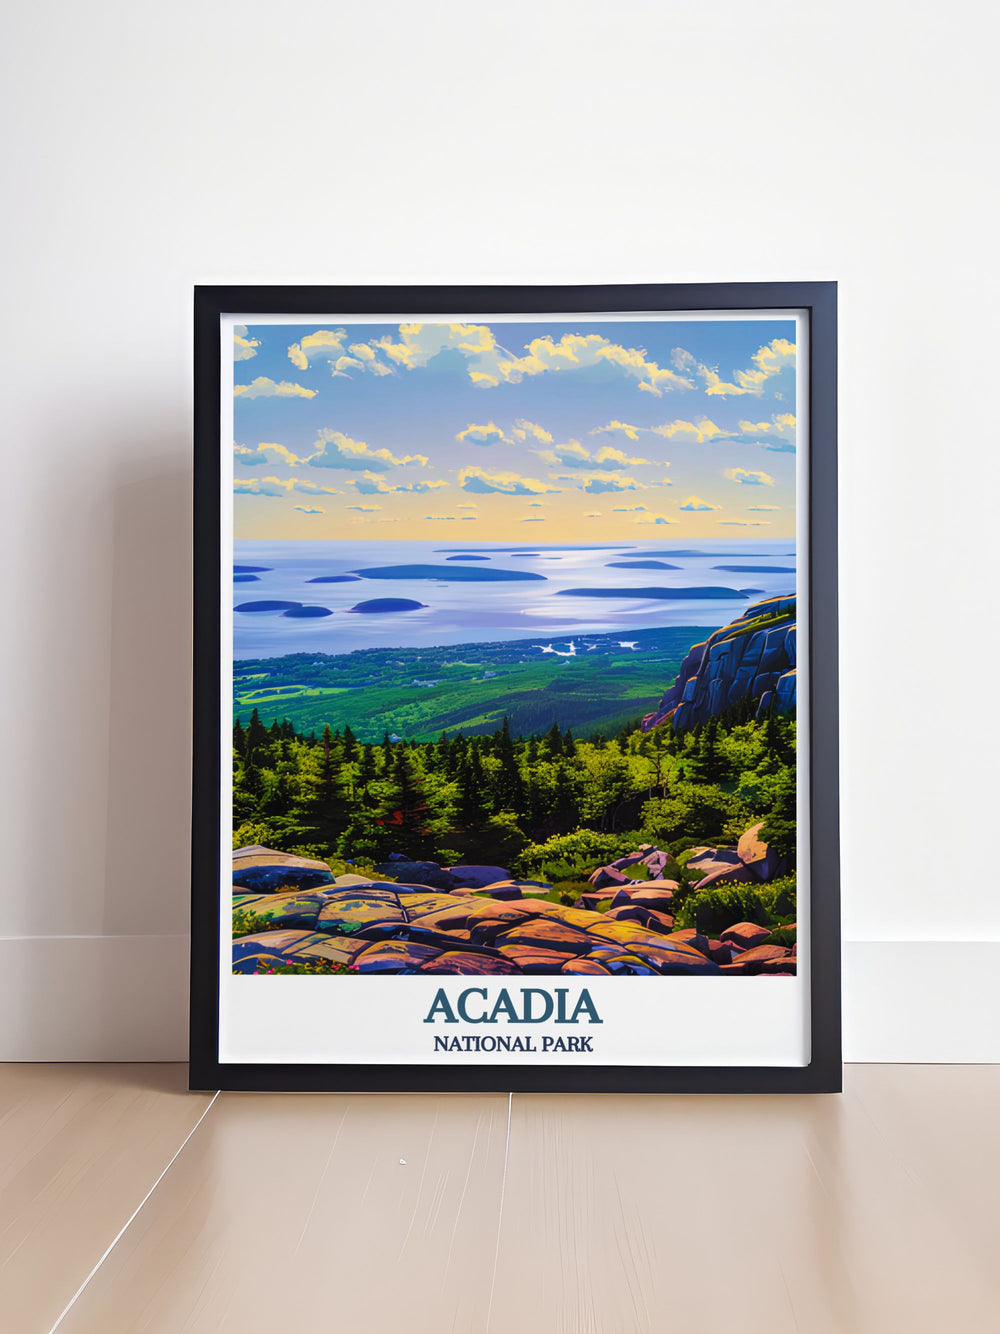 Beautiful retro travel print featuring Cadillac Mountain in Acadia National Park perfect for creating a serene atmosphere in any room vintage design capturing the essence of one of the most beloved US national parks ideal for home or office decor.